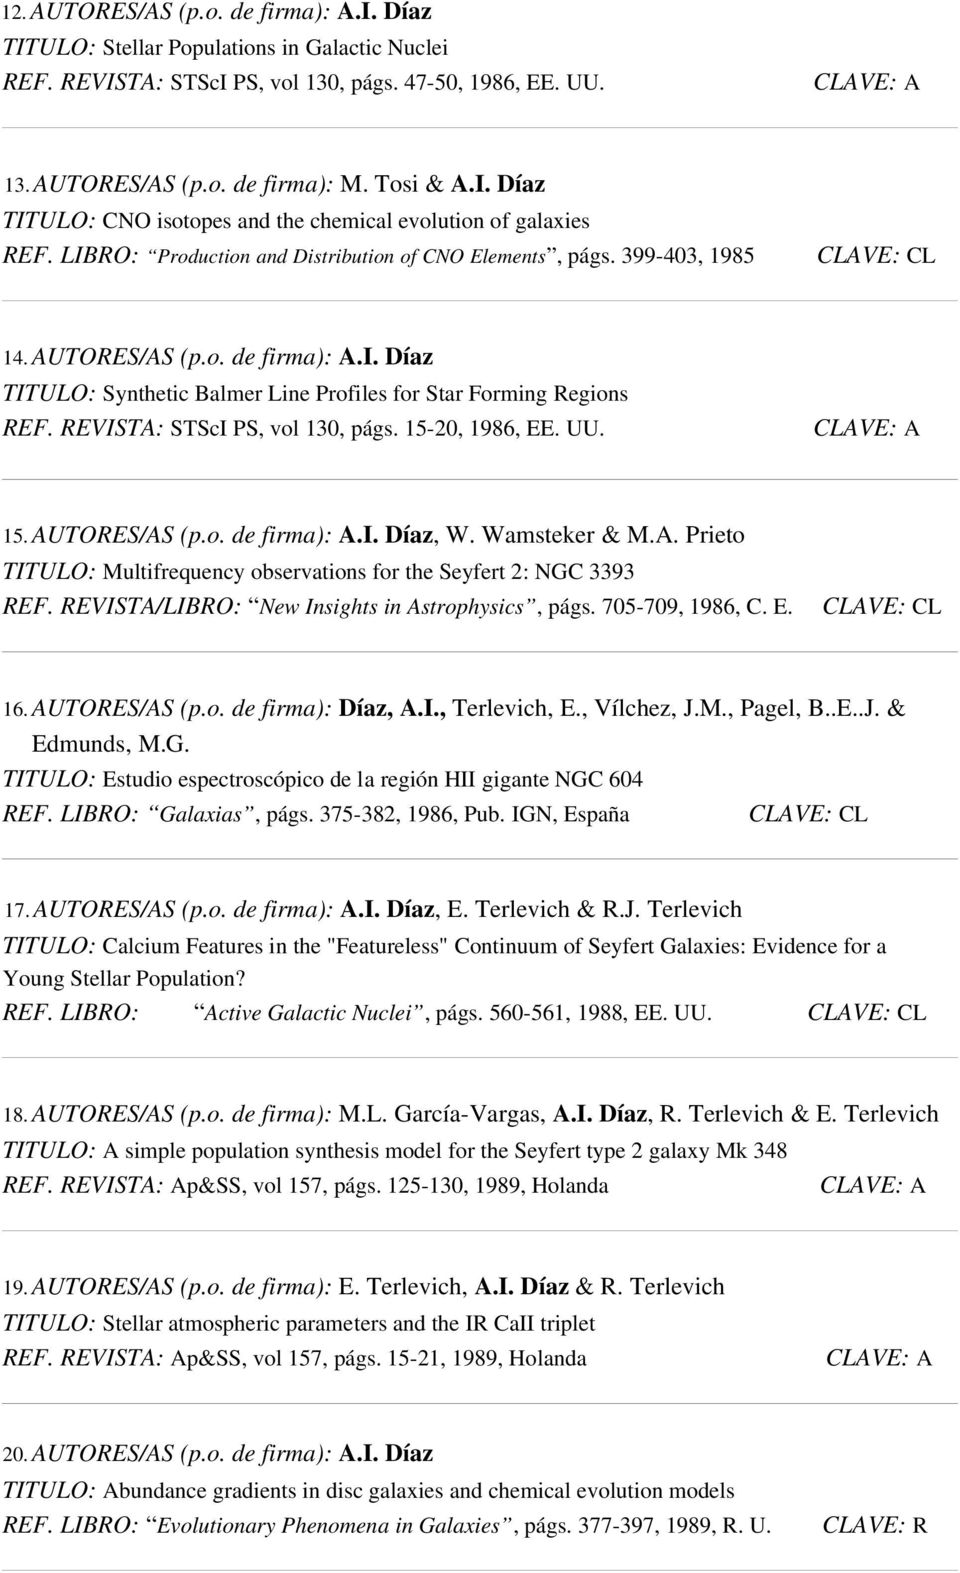 REVISTA: STScI PS, vol 130, págs. 15 20, 1986, EE. UU. 15. AUTORES/AS (p.o. de firma): A.I. Díaz, W. Wamsteker & M.A. Prieto TITULO: Multifrequency observations for the Seyfert 2: NGC 3393 REF.